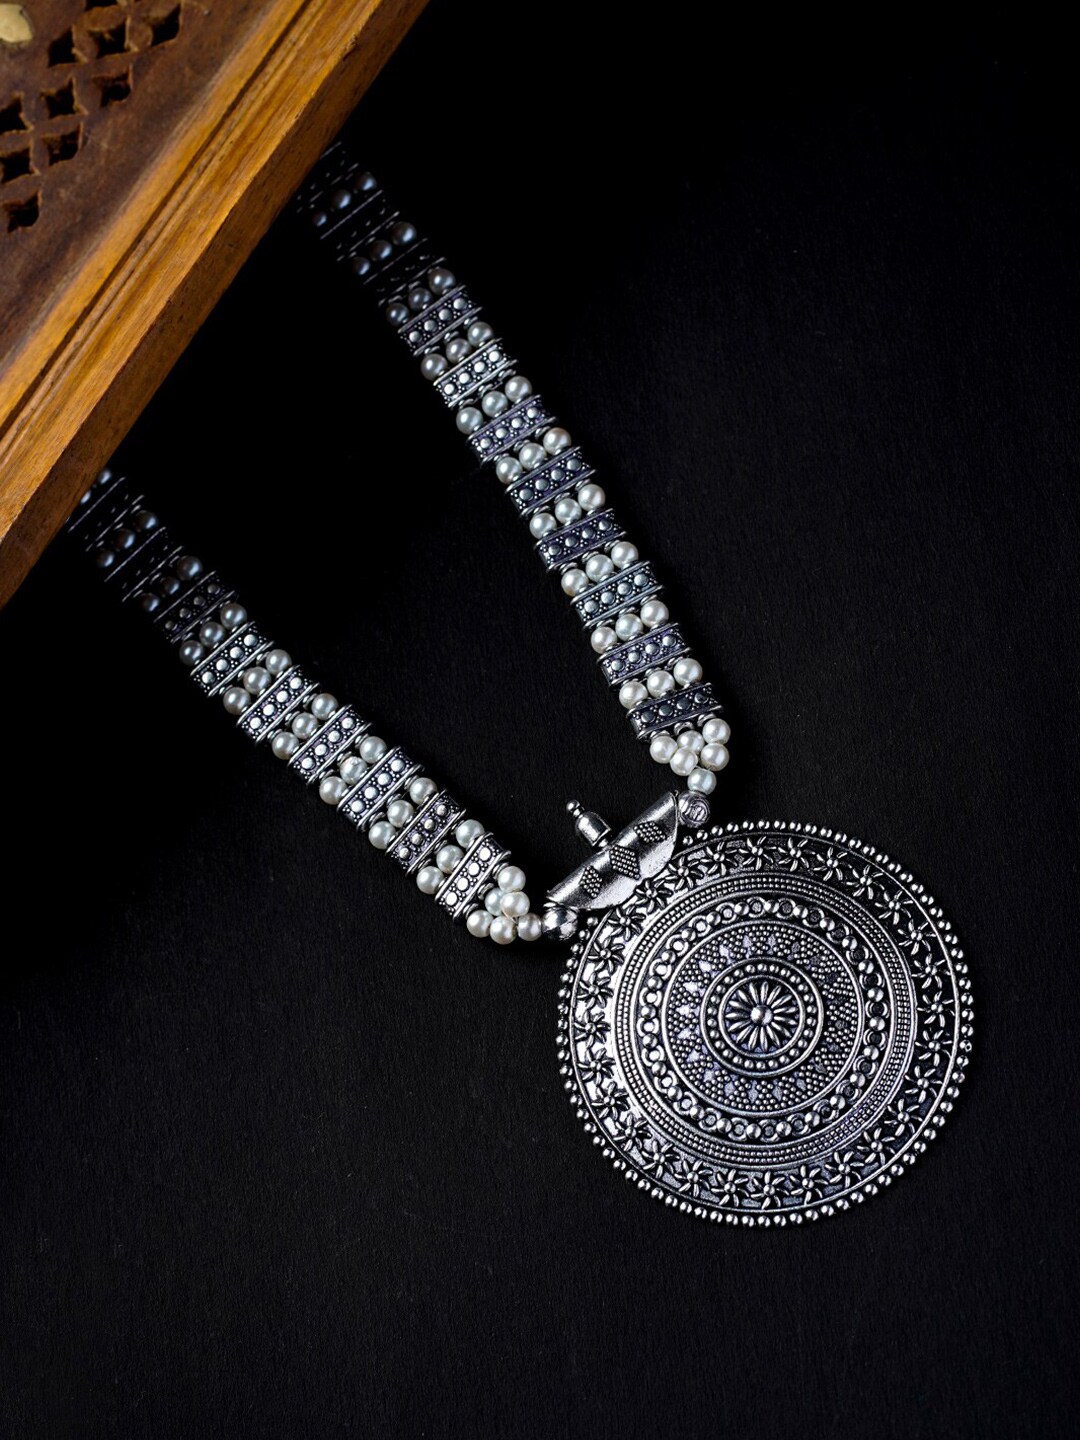 MORKANTH JEWELLERY Silver-Toned Silver-Plated Oxidised Necklace Price in India